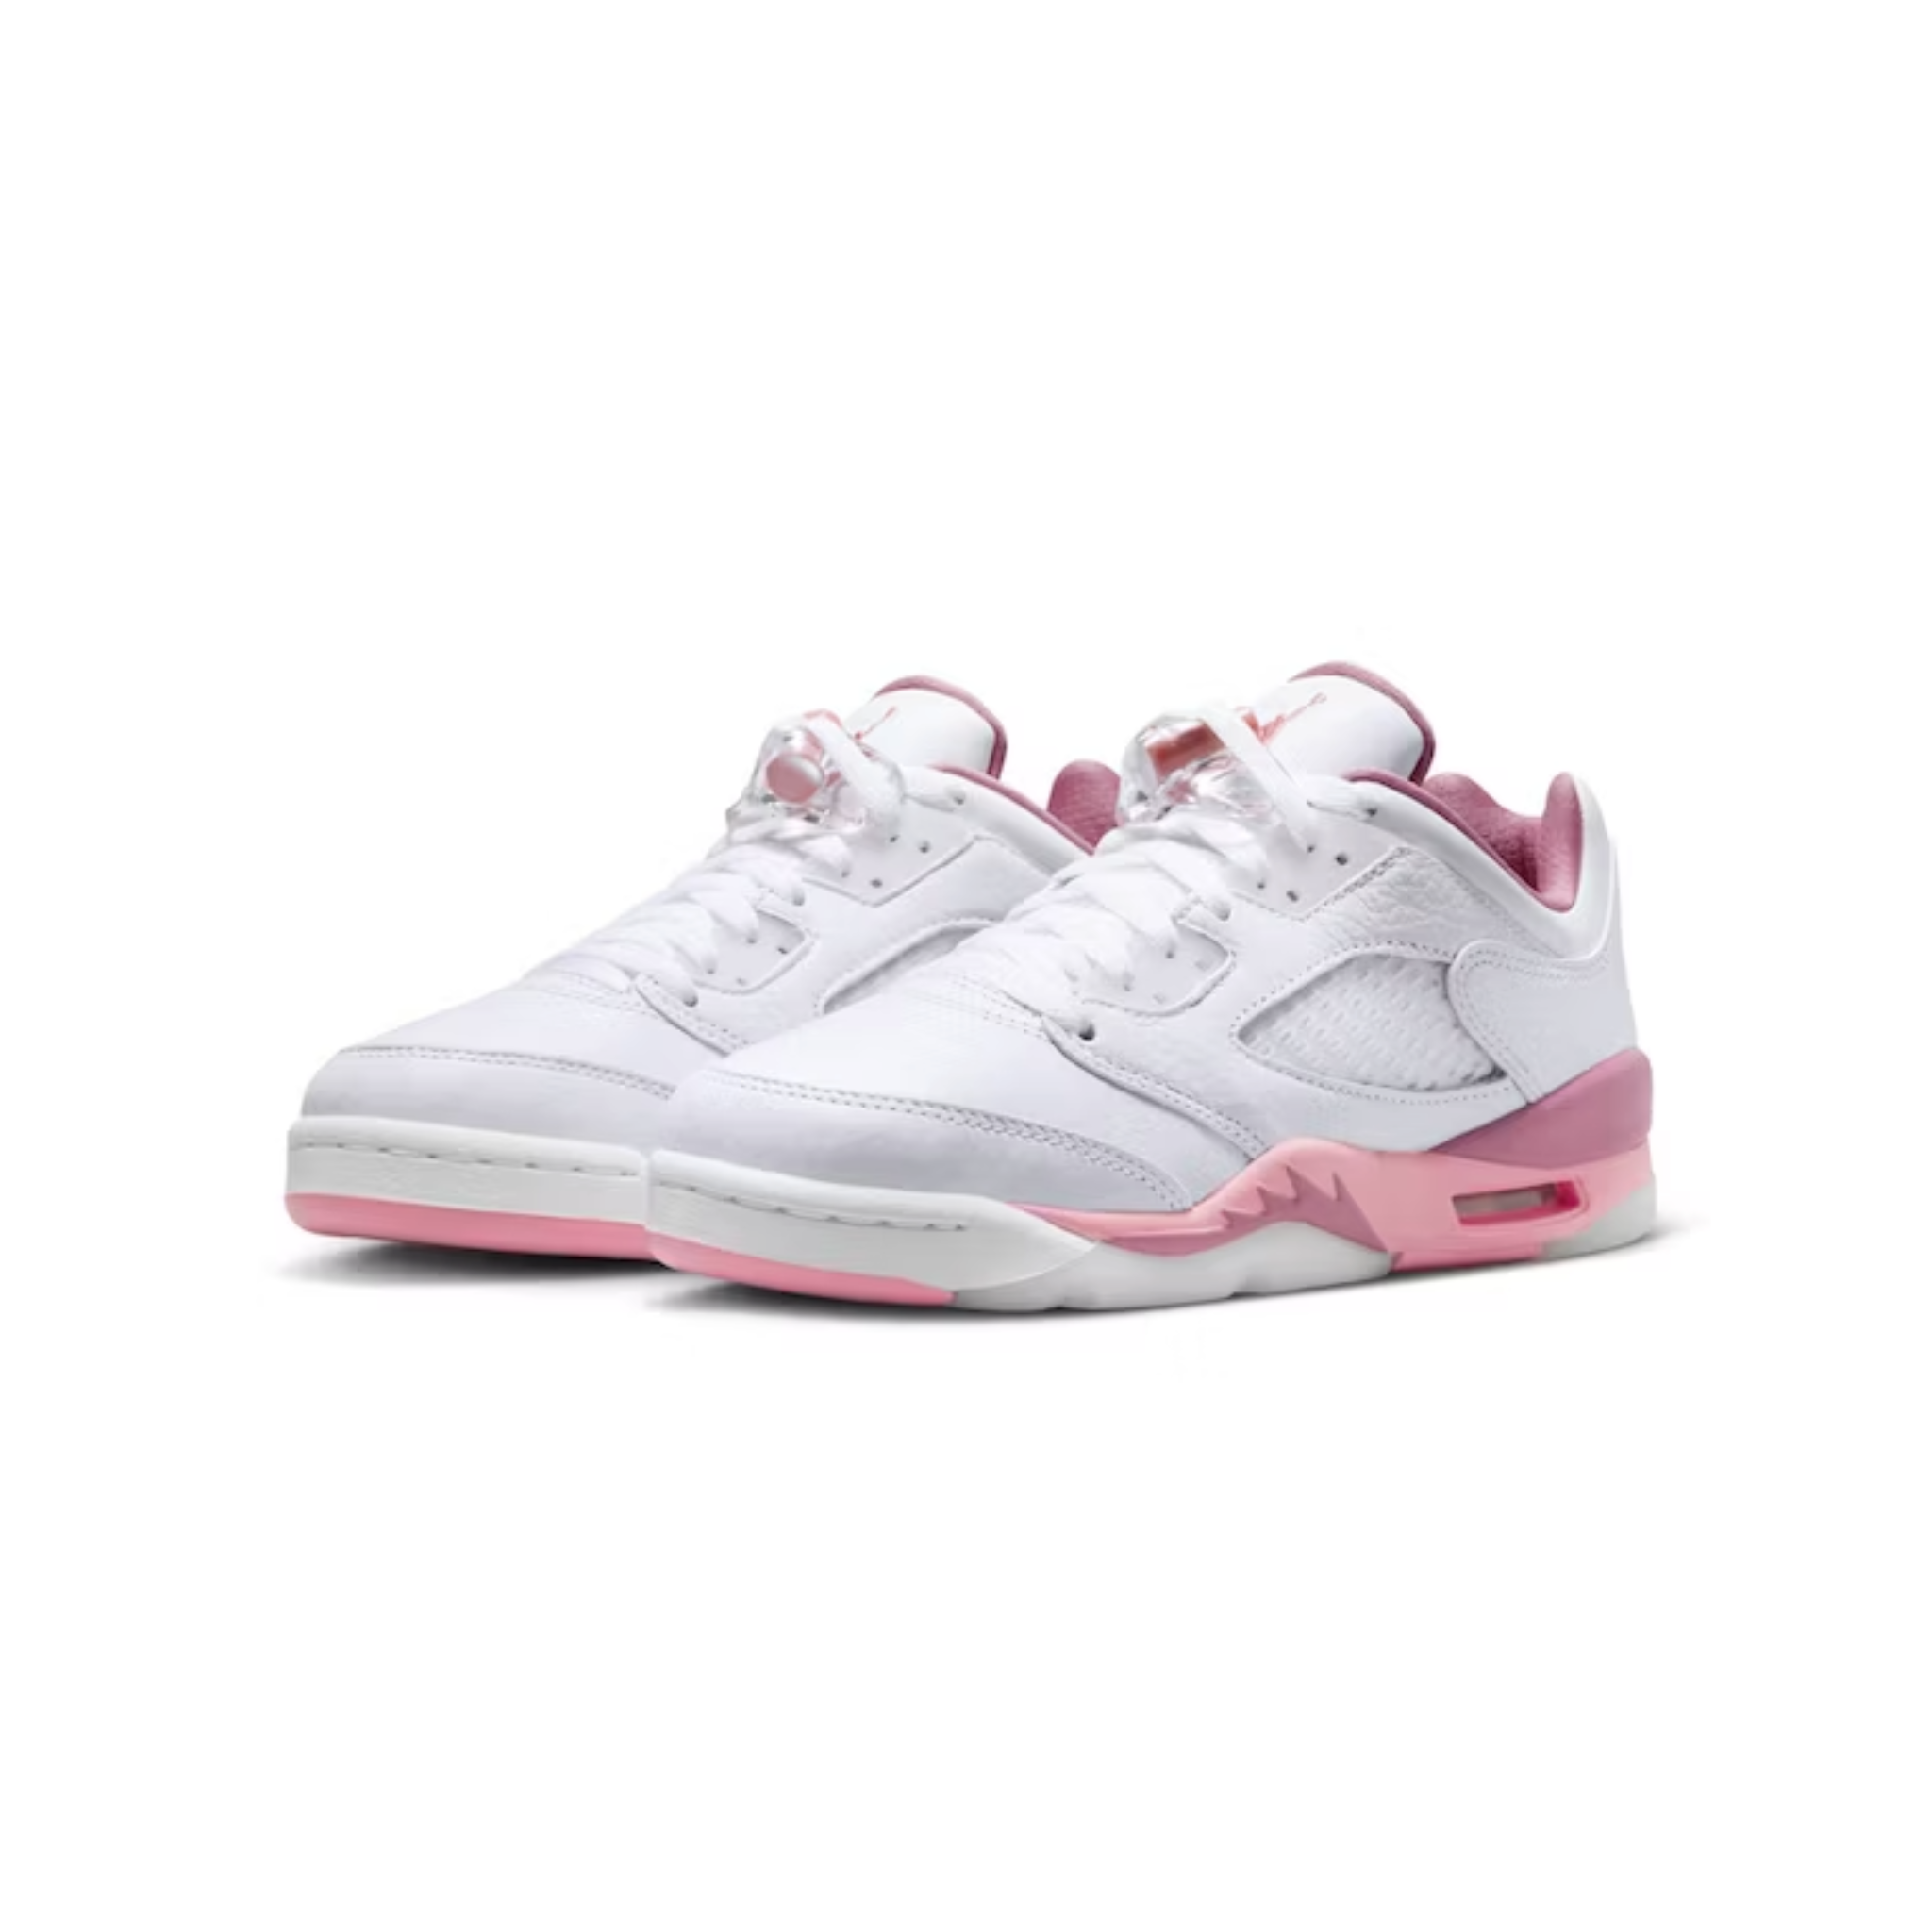 Air Jordan 5 Retro Low PS ‘Crafted For Her’